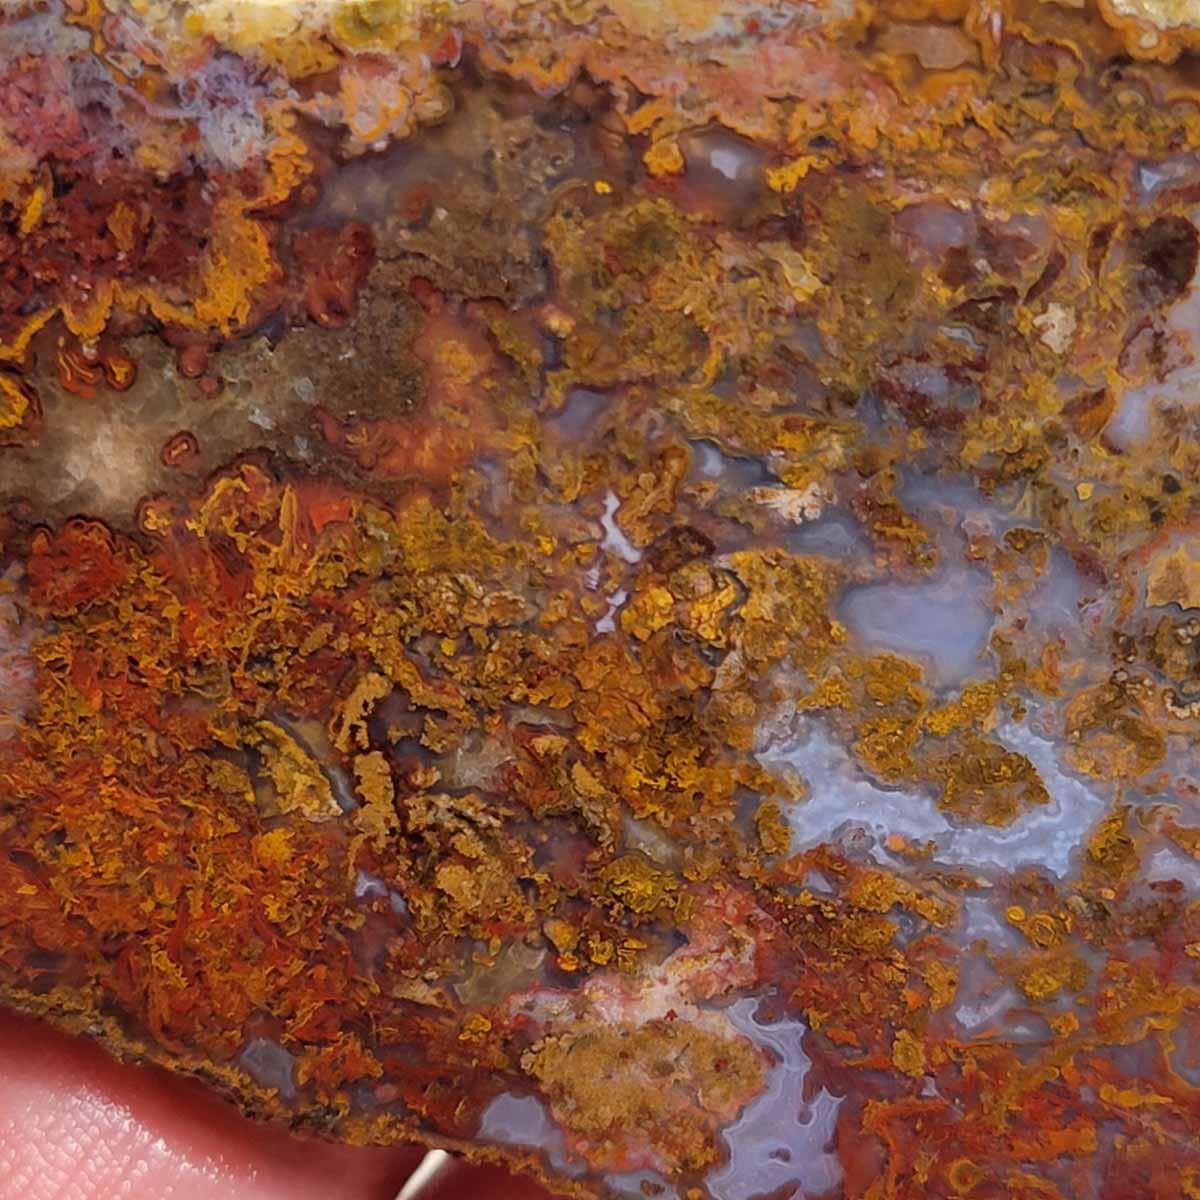 GORGEOUS Mystery Moss Agate Slab! - Lapidary Central